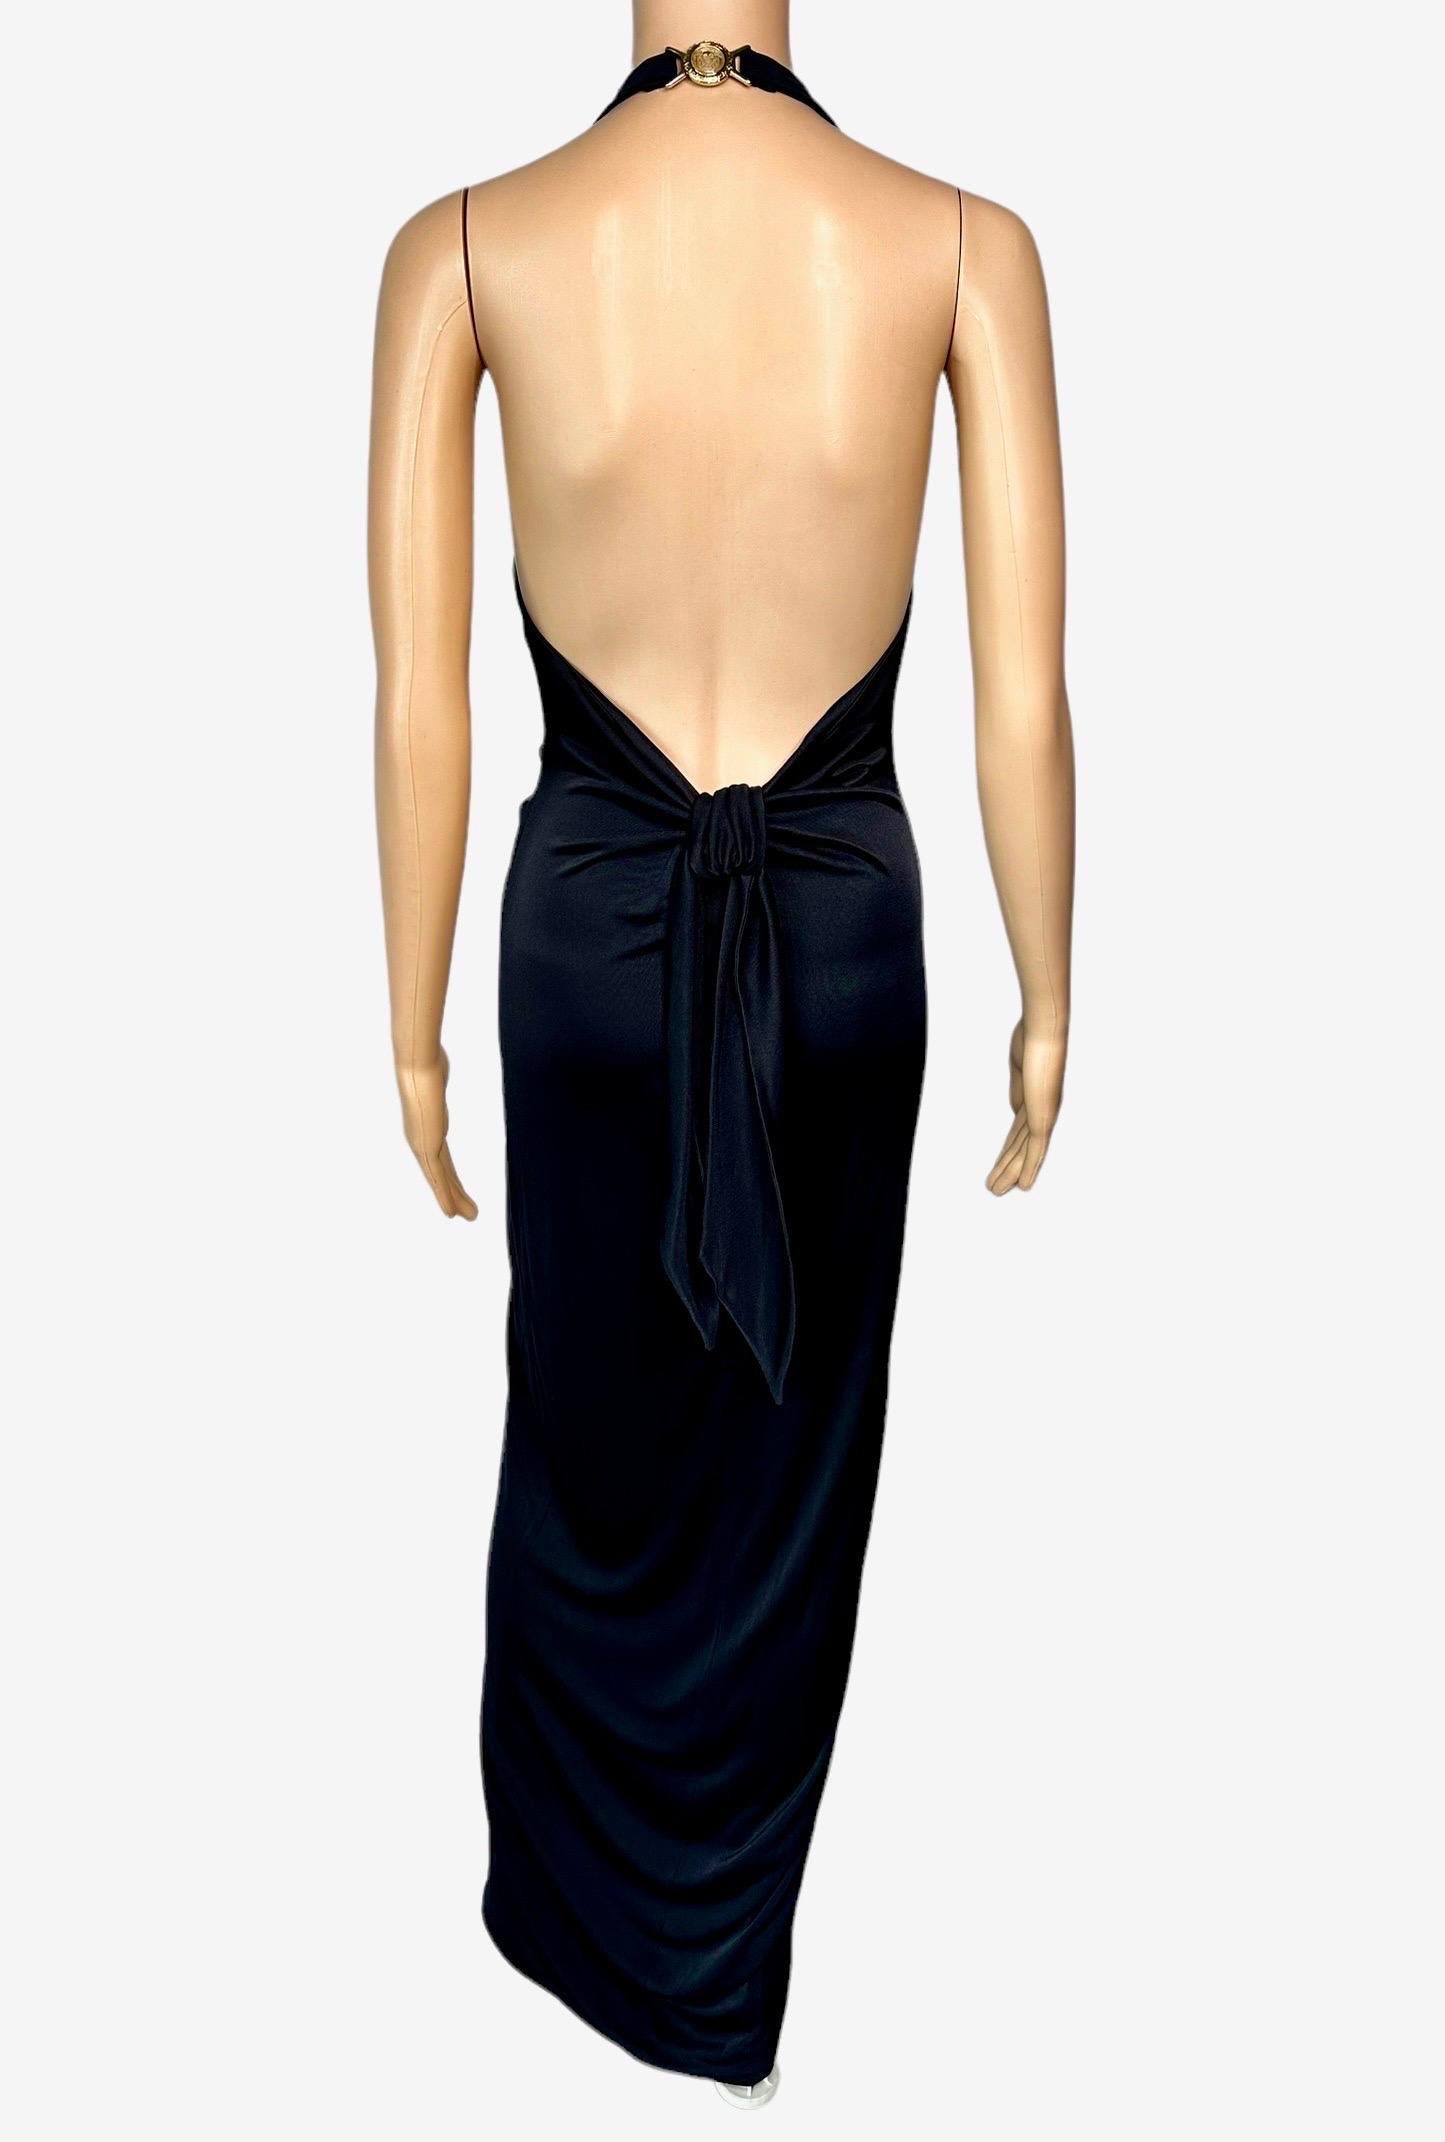 Black Versace S/S 2005 Runway Plunging Hi-Low Ruched Open Back Evening Dress Gown